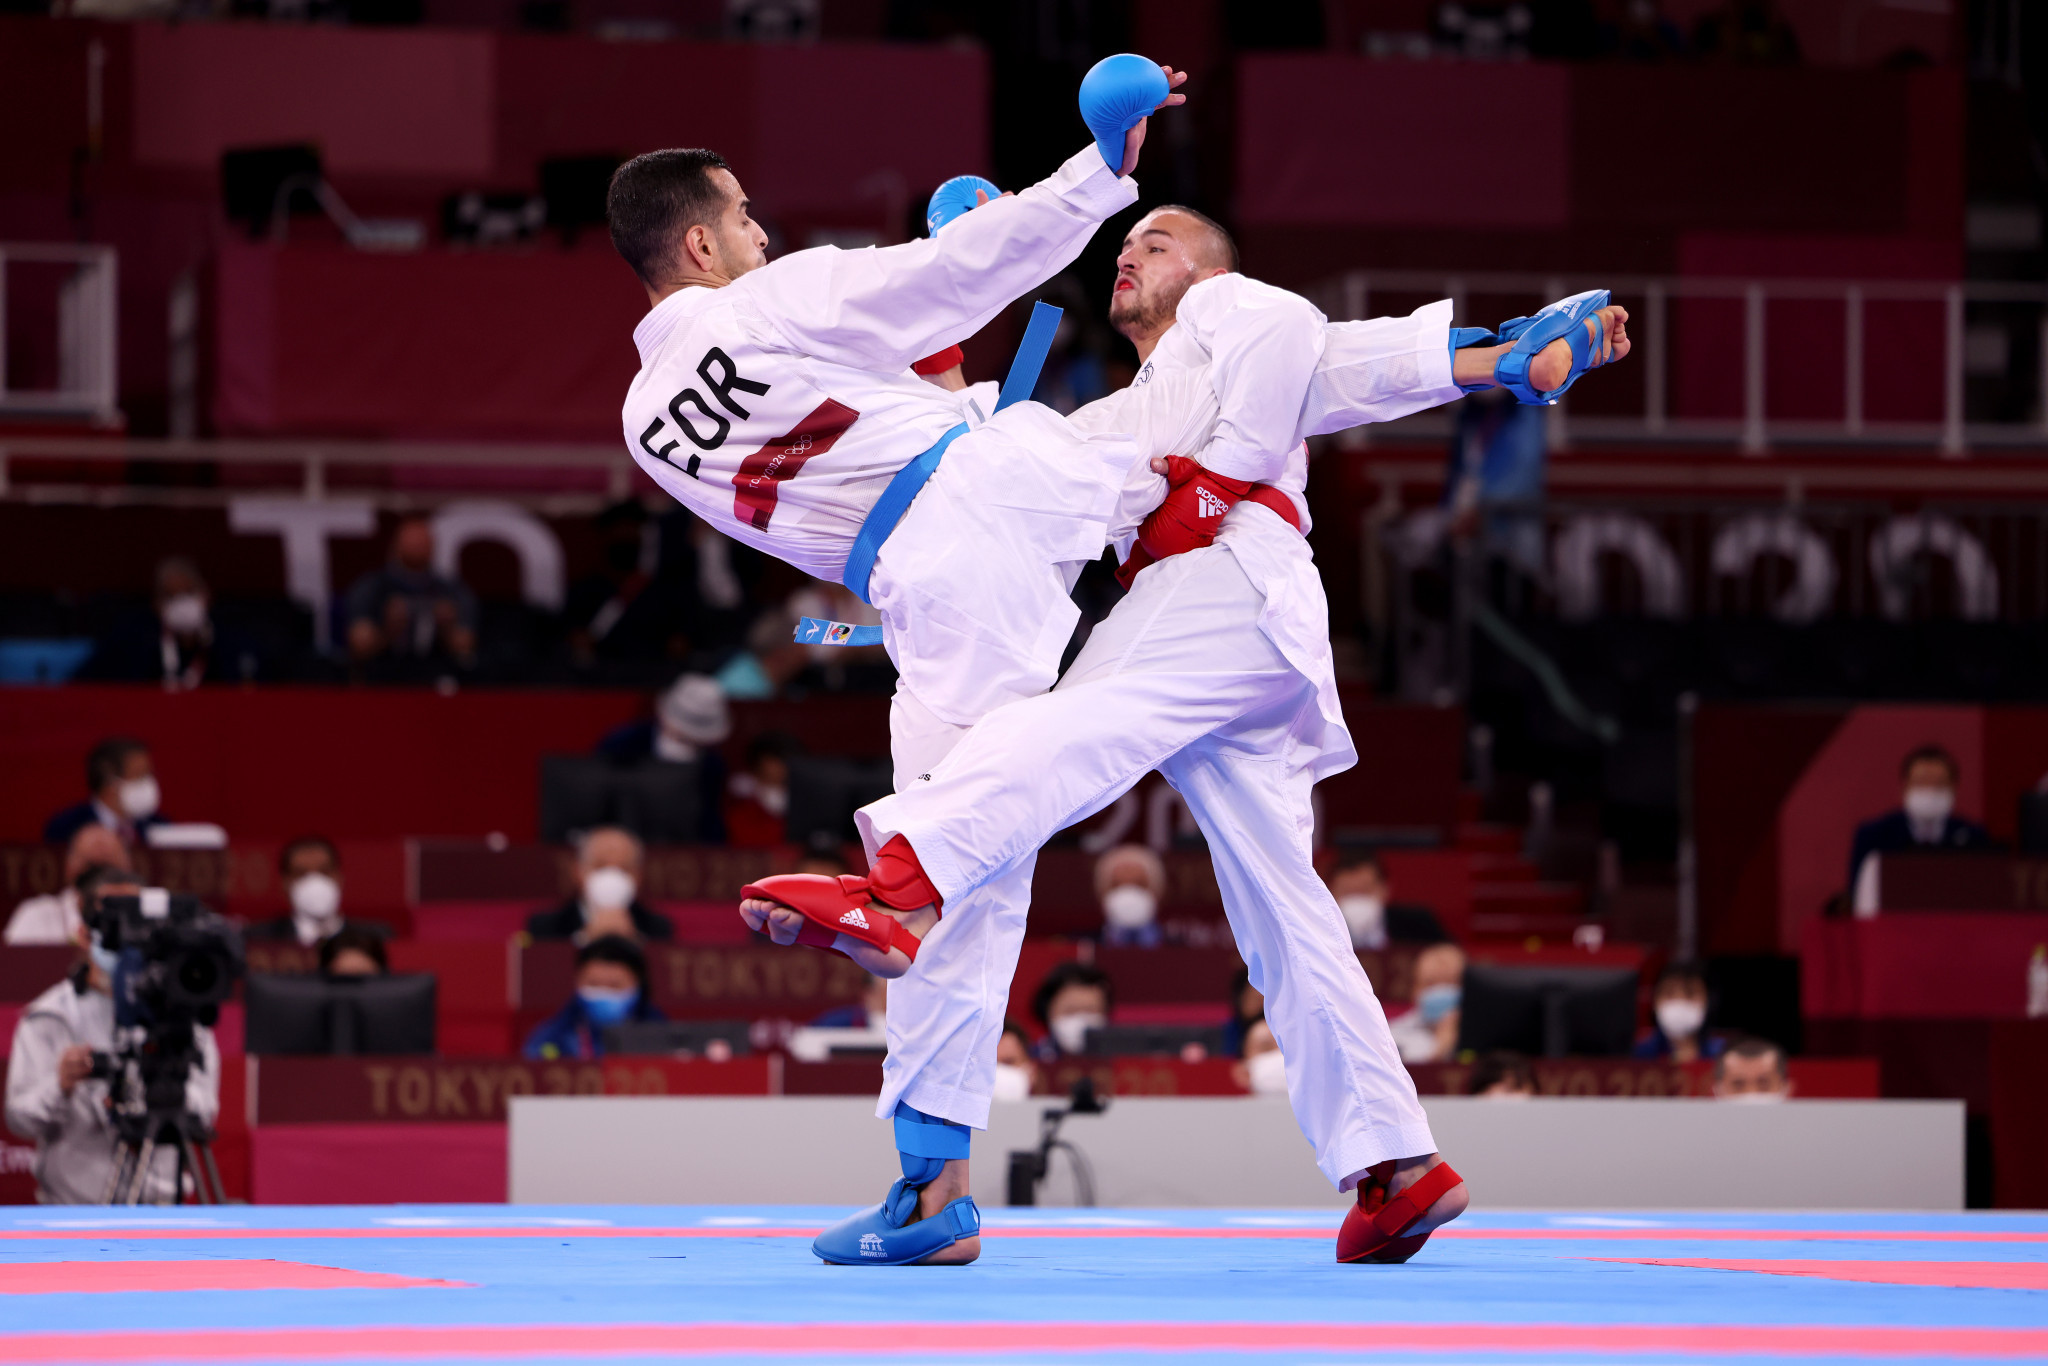 Karate to allow wider representation of refugees in international competitions